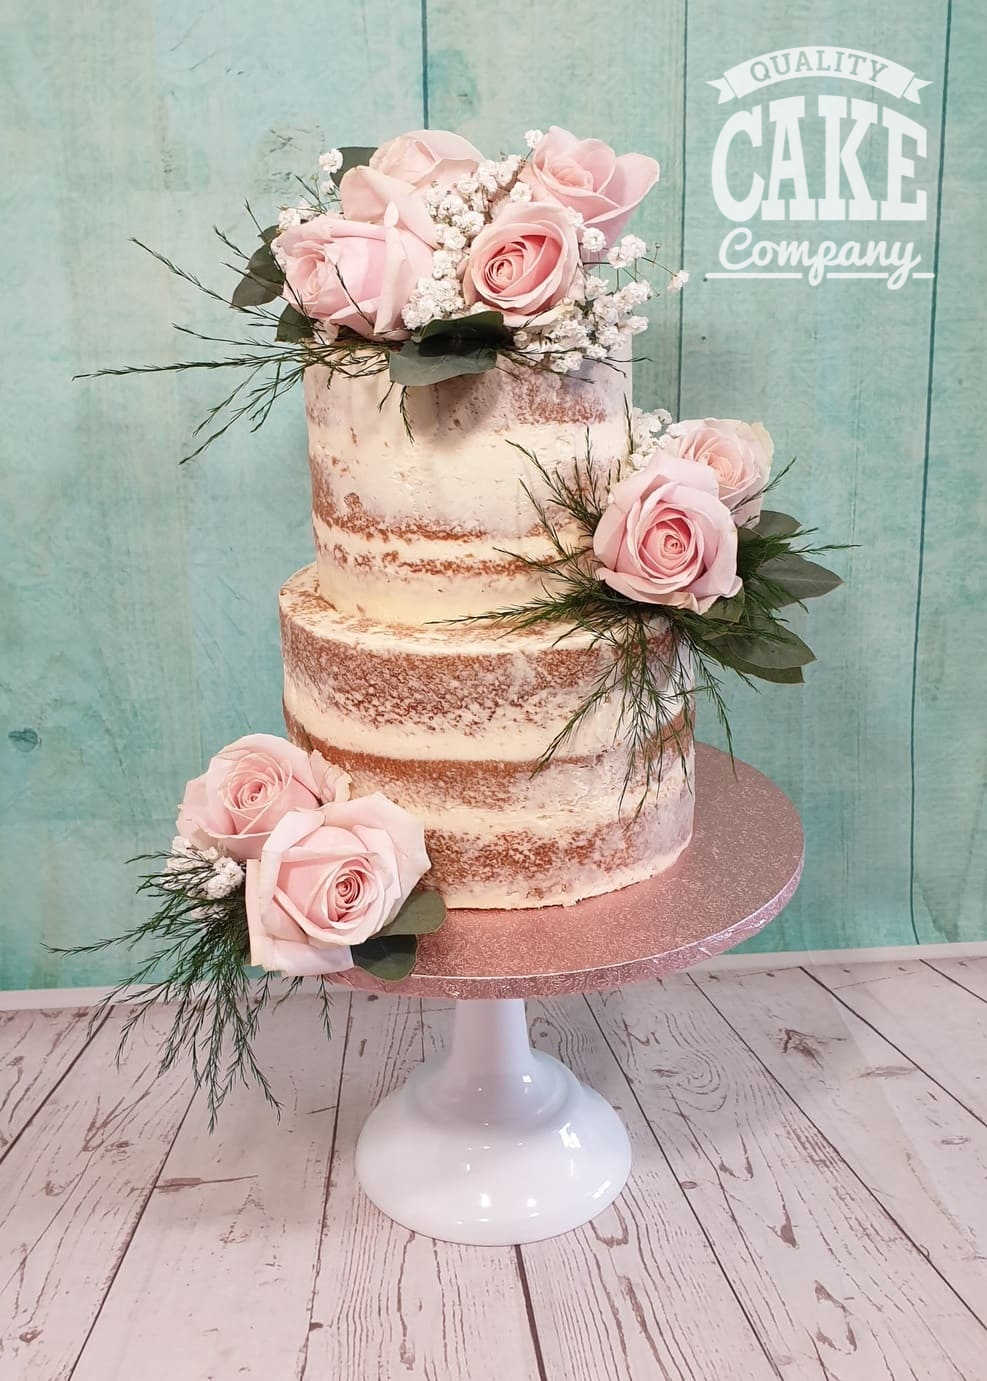 https://qualitycakecompany.com/wp-content/uploads/2022/12/Rustic-Floral-wedding-two-tier-pink-roses.jpg